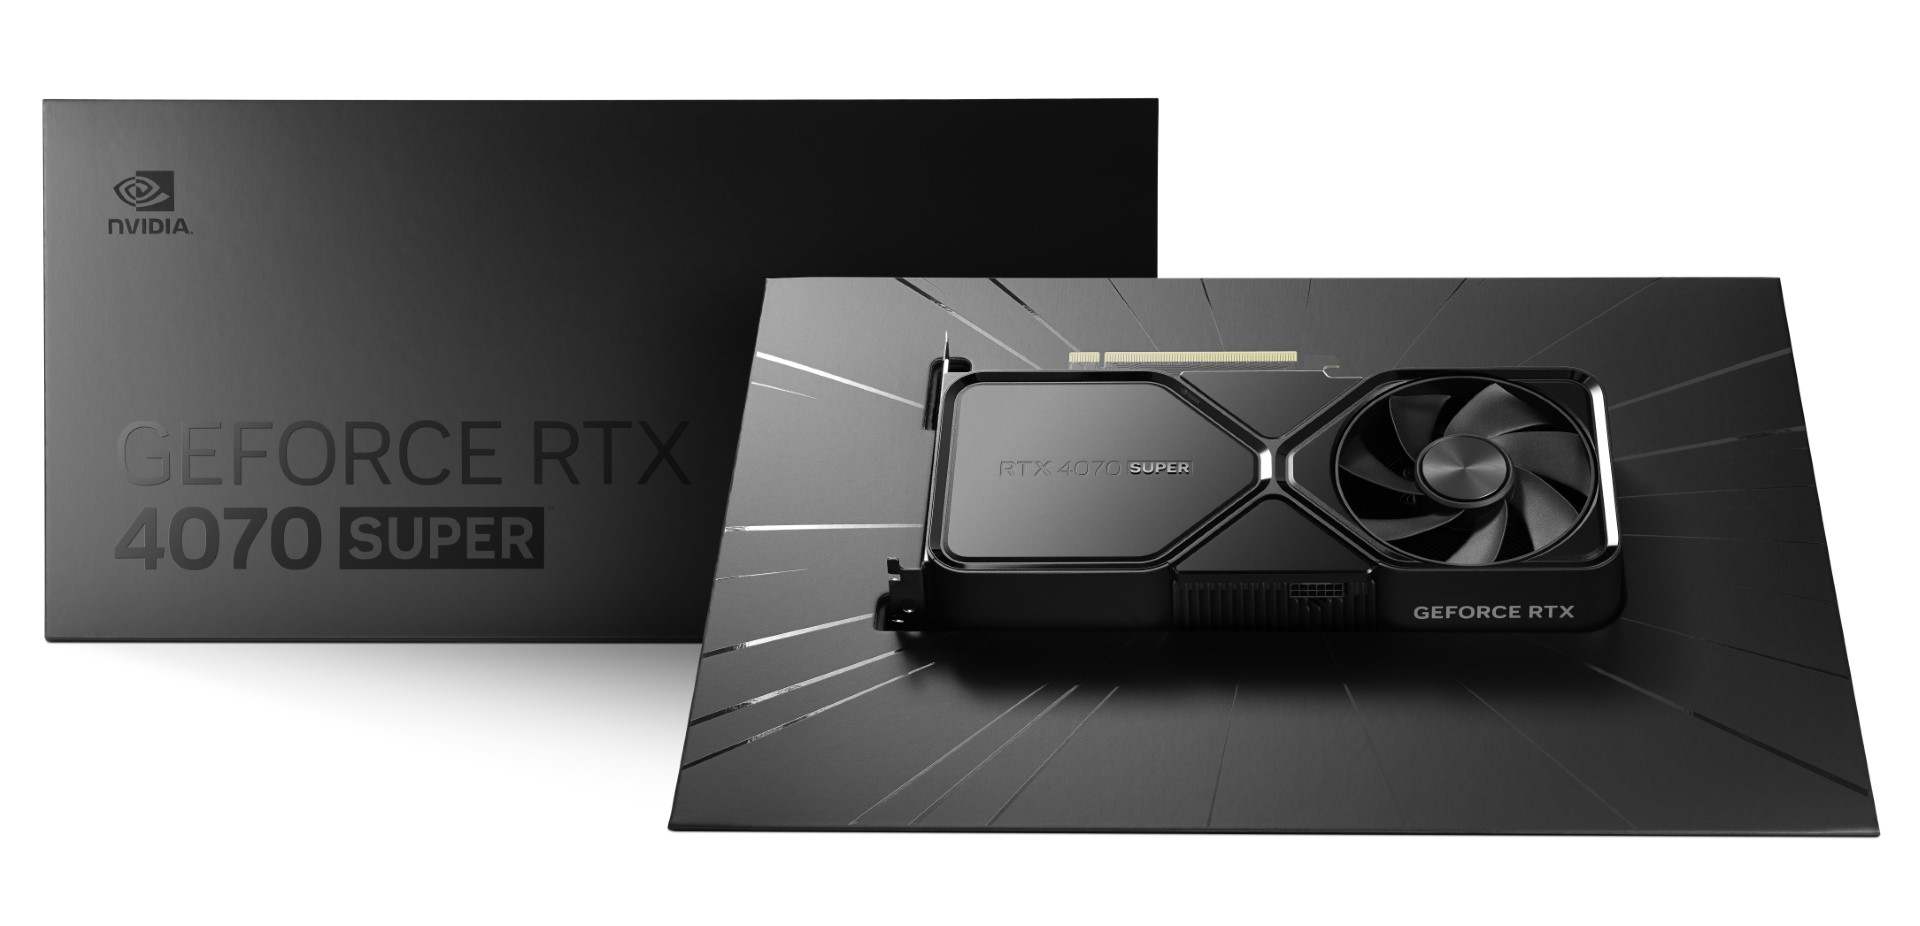 Nvidia GeForce RTX 4070 Orderly provides 22% greater core counts than traditional RTX 4070 at identical $599 MSRP, launches January 17